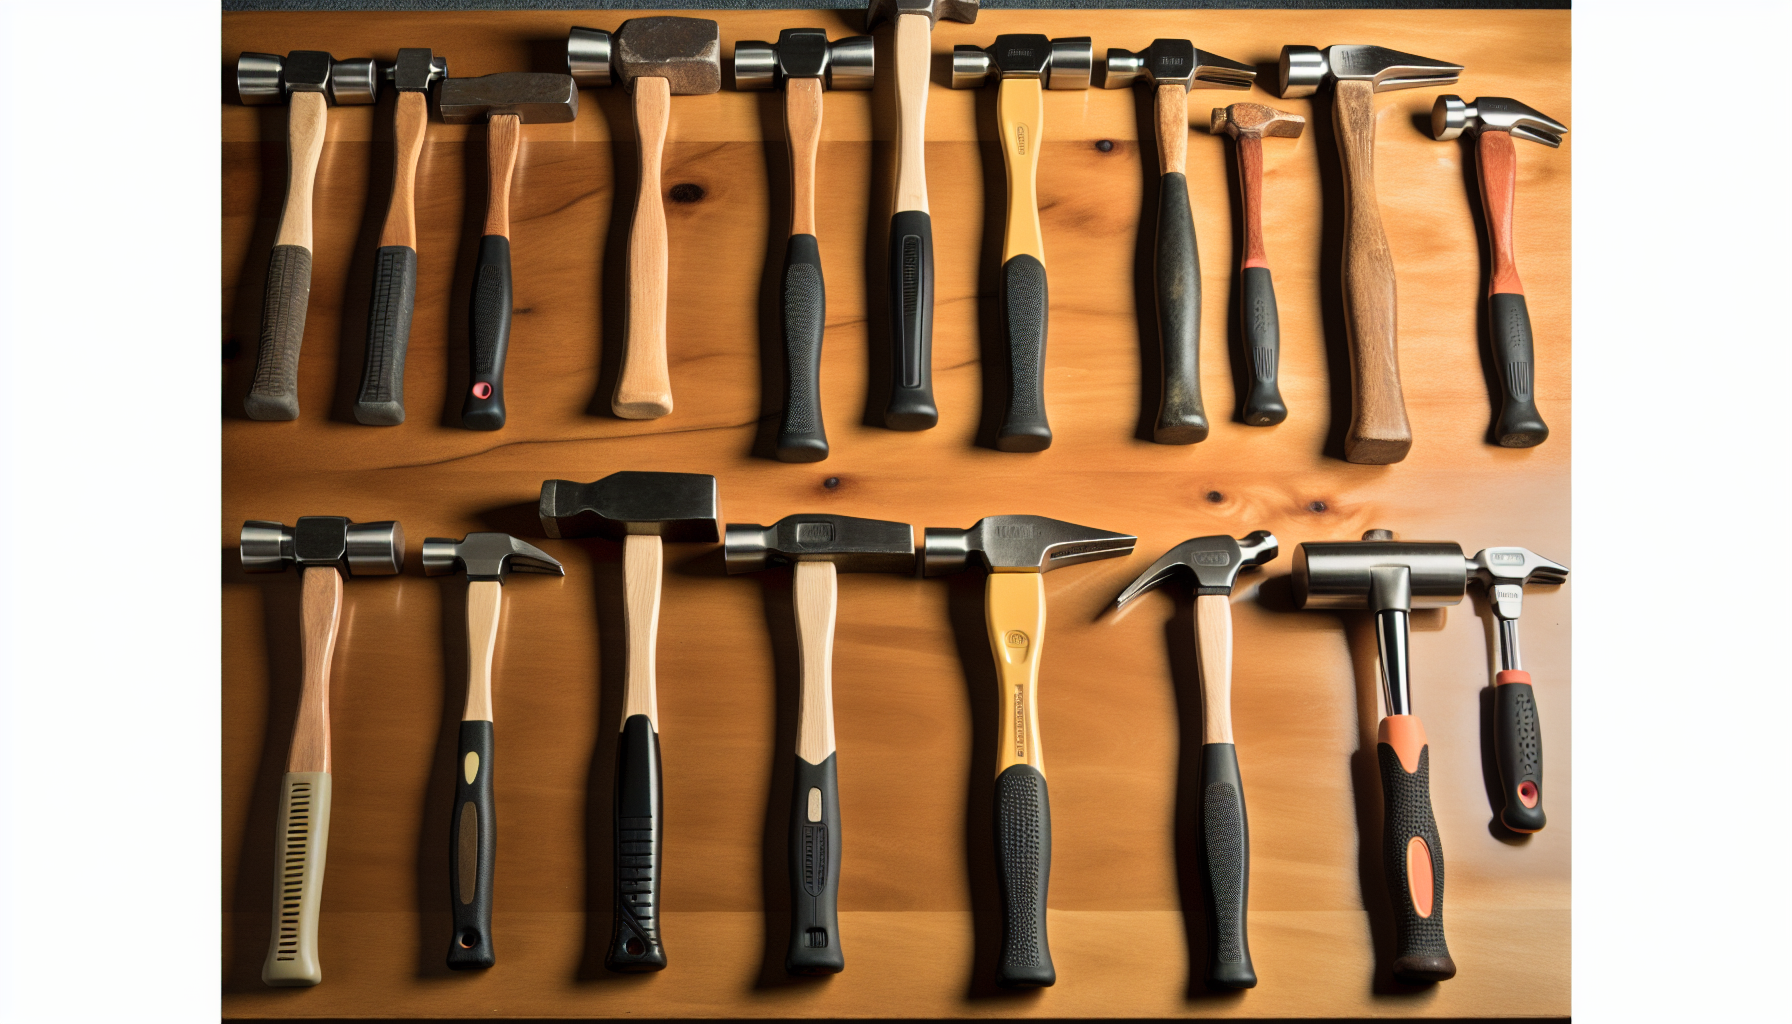 A selection of different bricklayer hammers from various brands